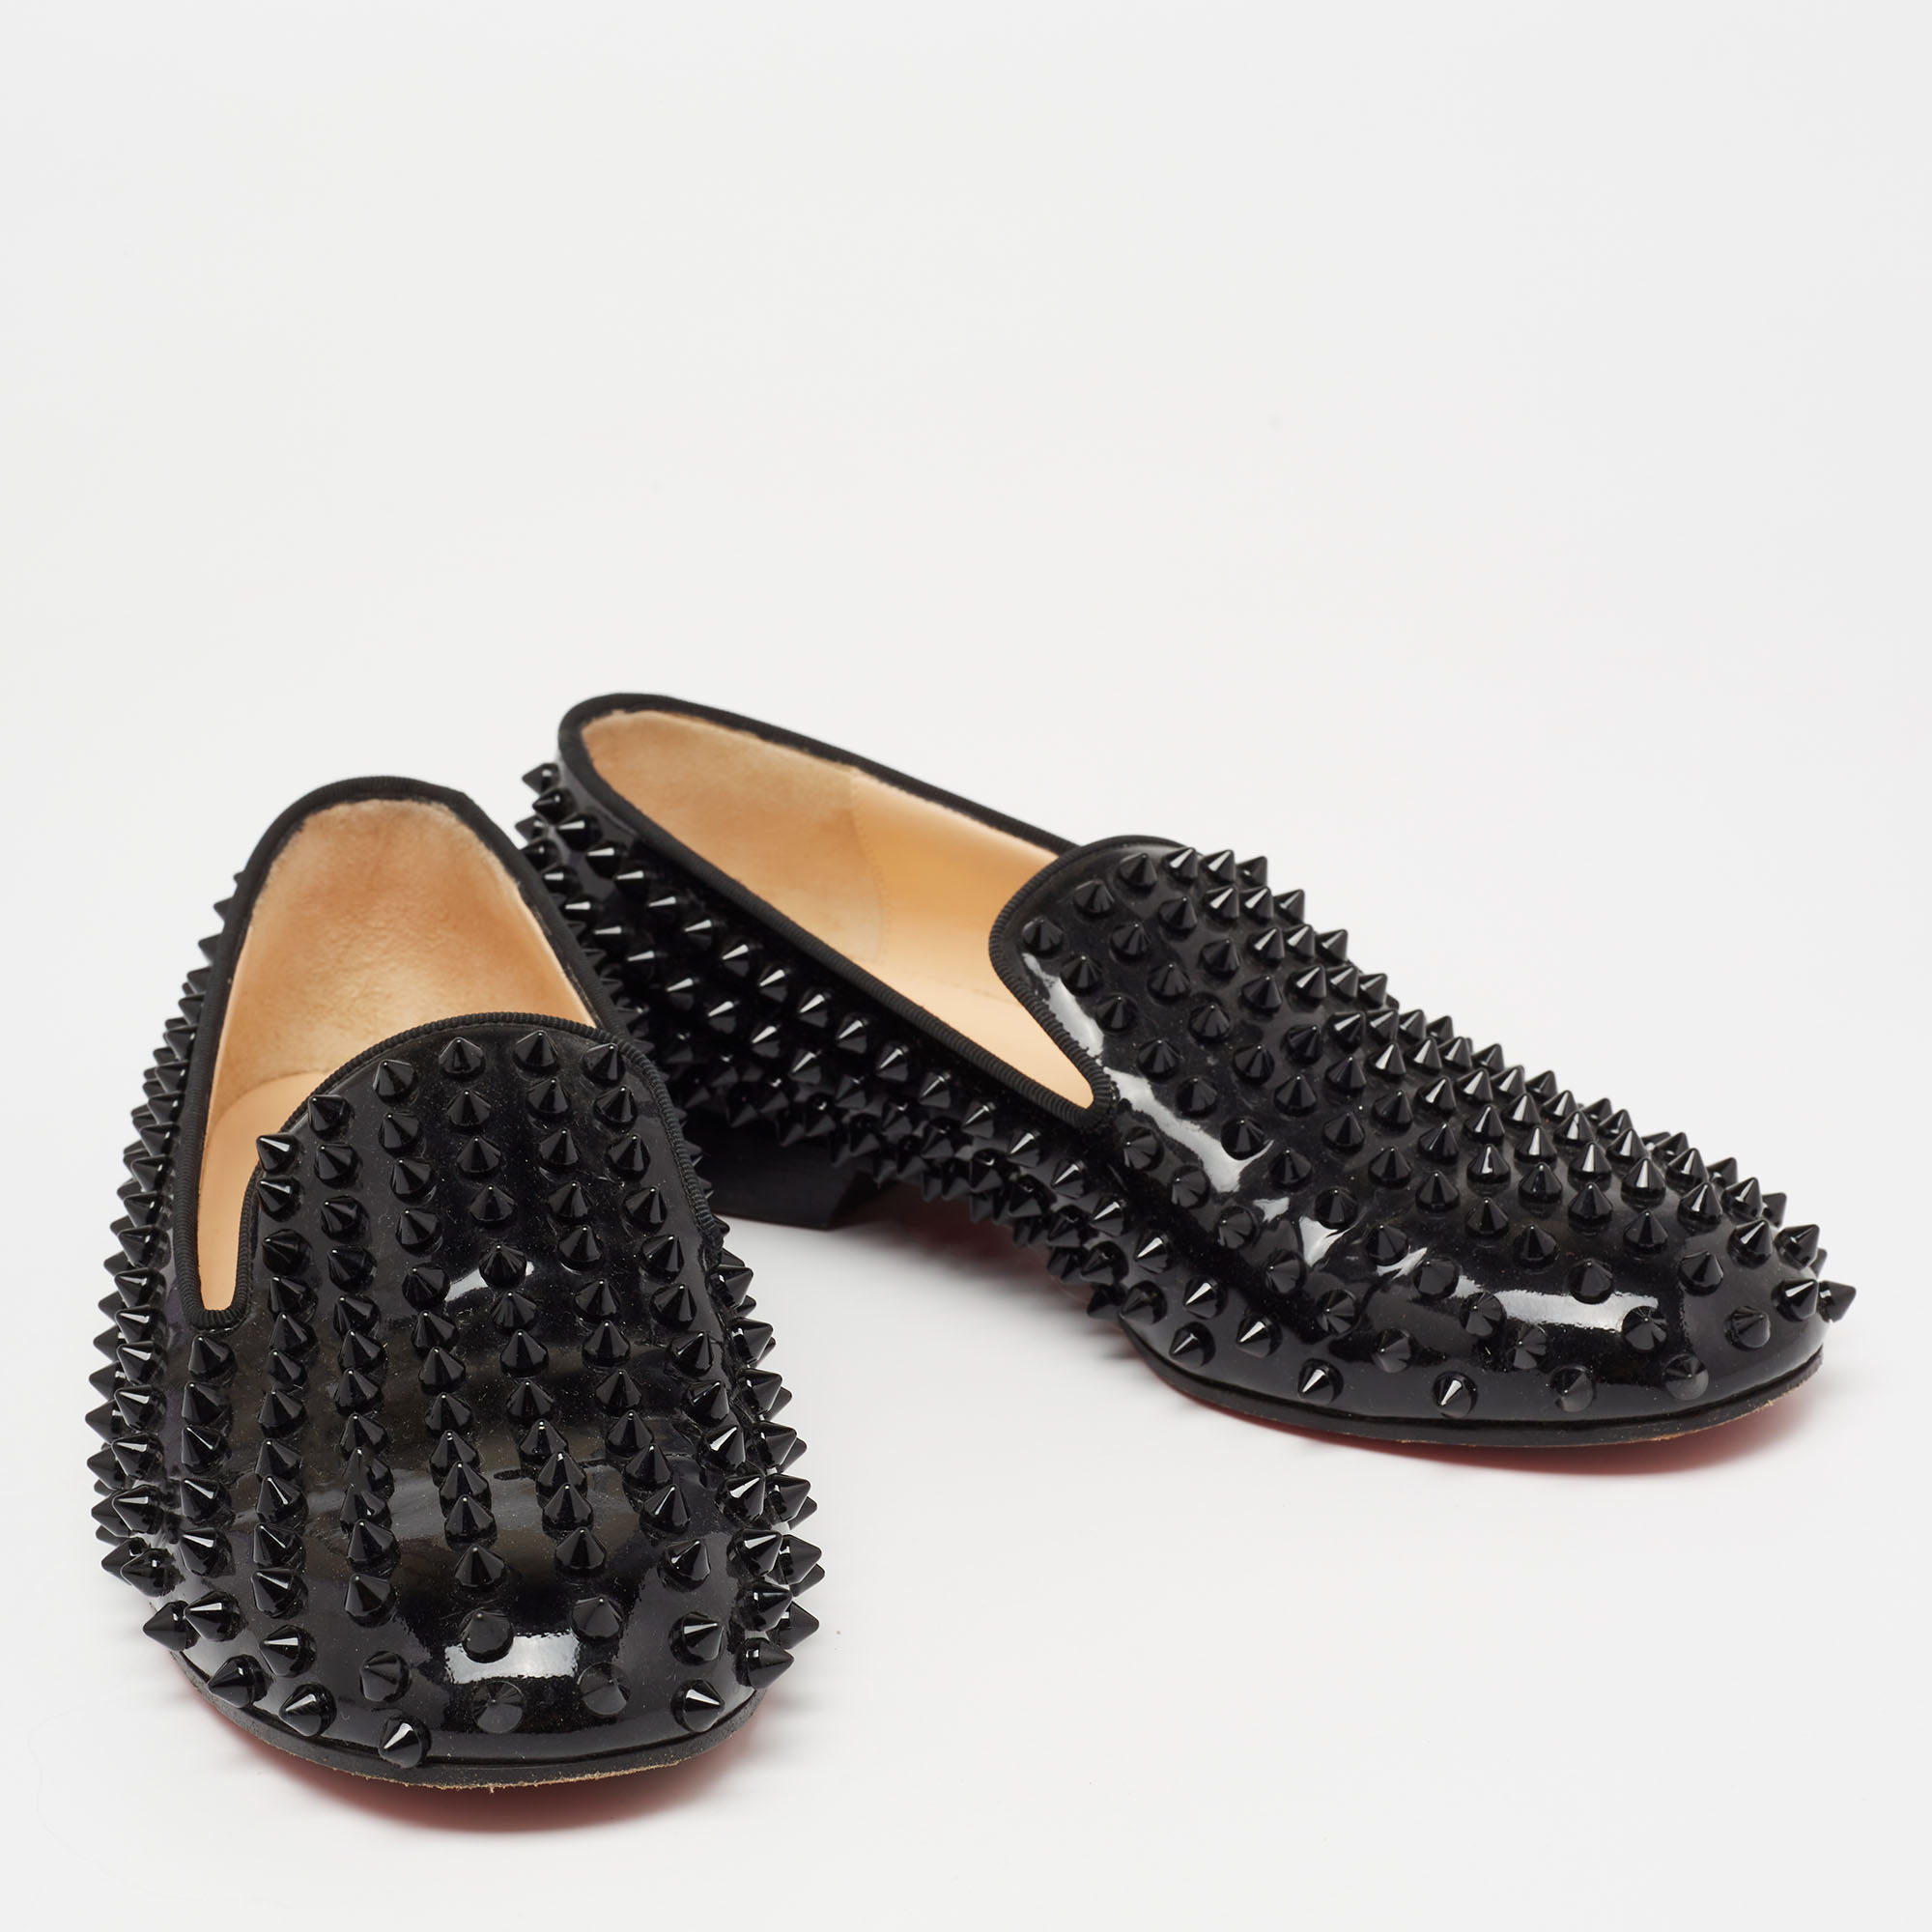 Christian Louboutin Black Patent Leather Dandelion Spikes Smoking Slippers Size 37